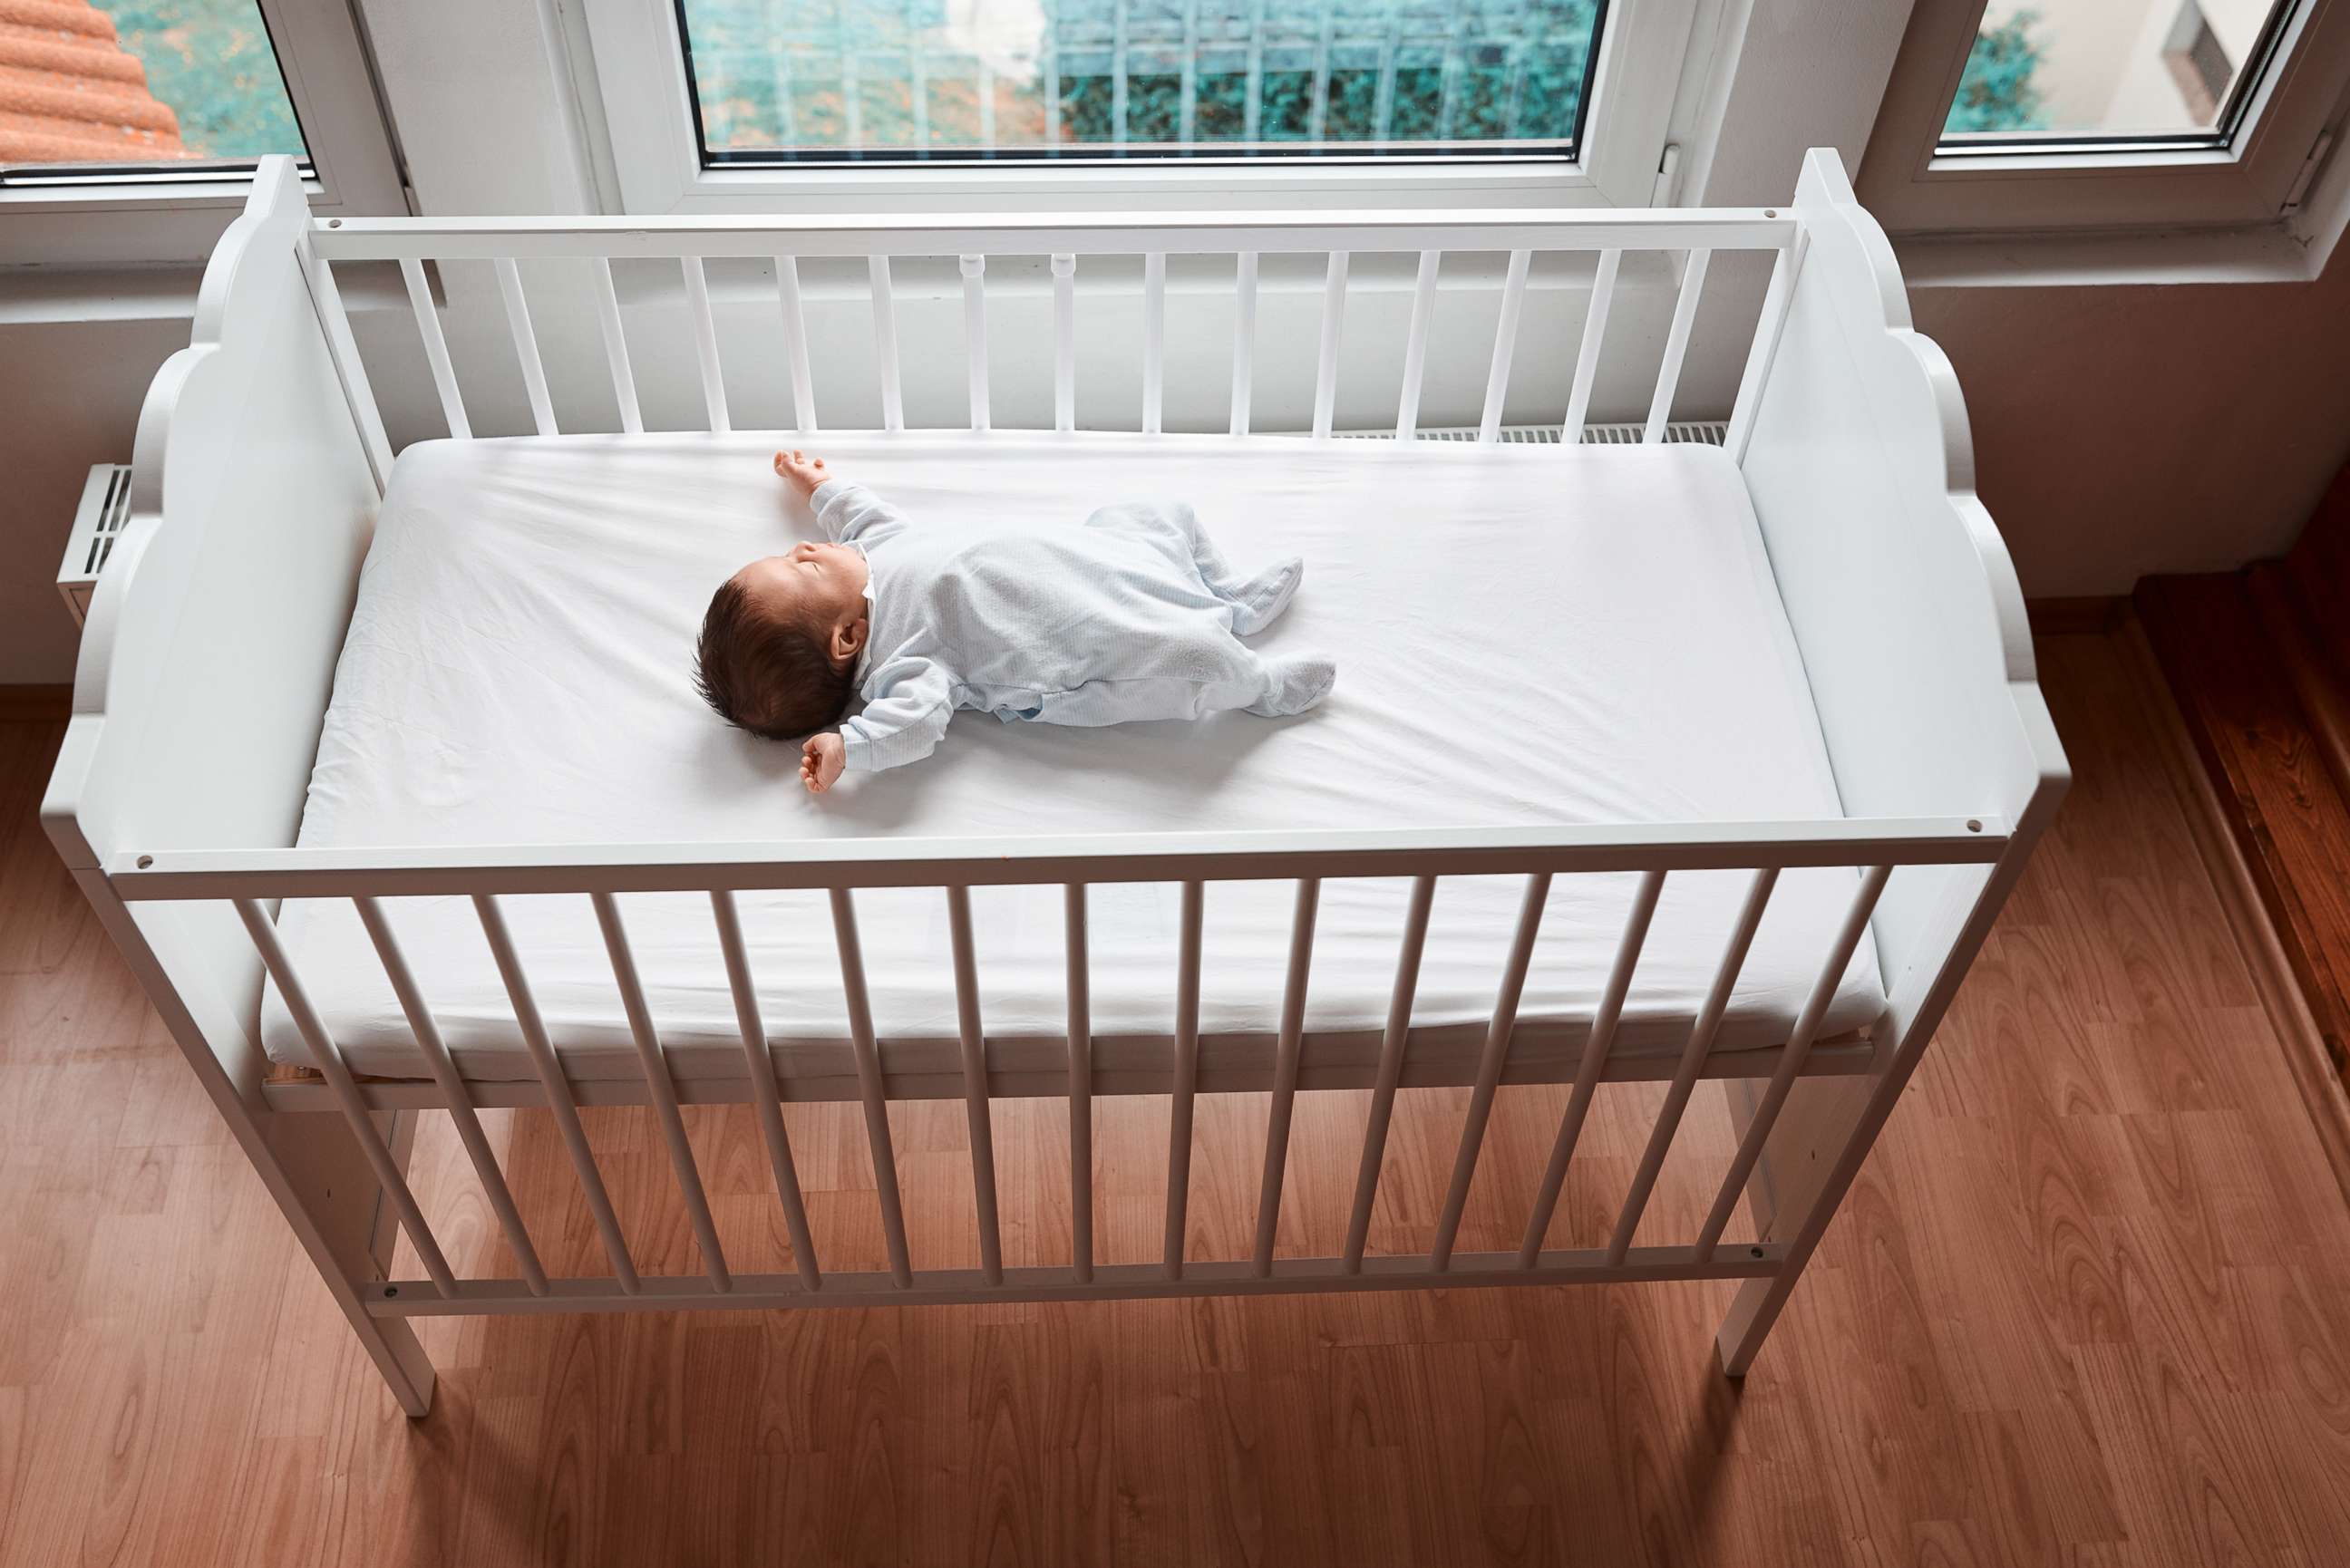 PHOTO: In this undated file photo, a baby girl sleeps in her crib.